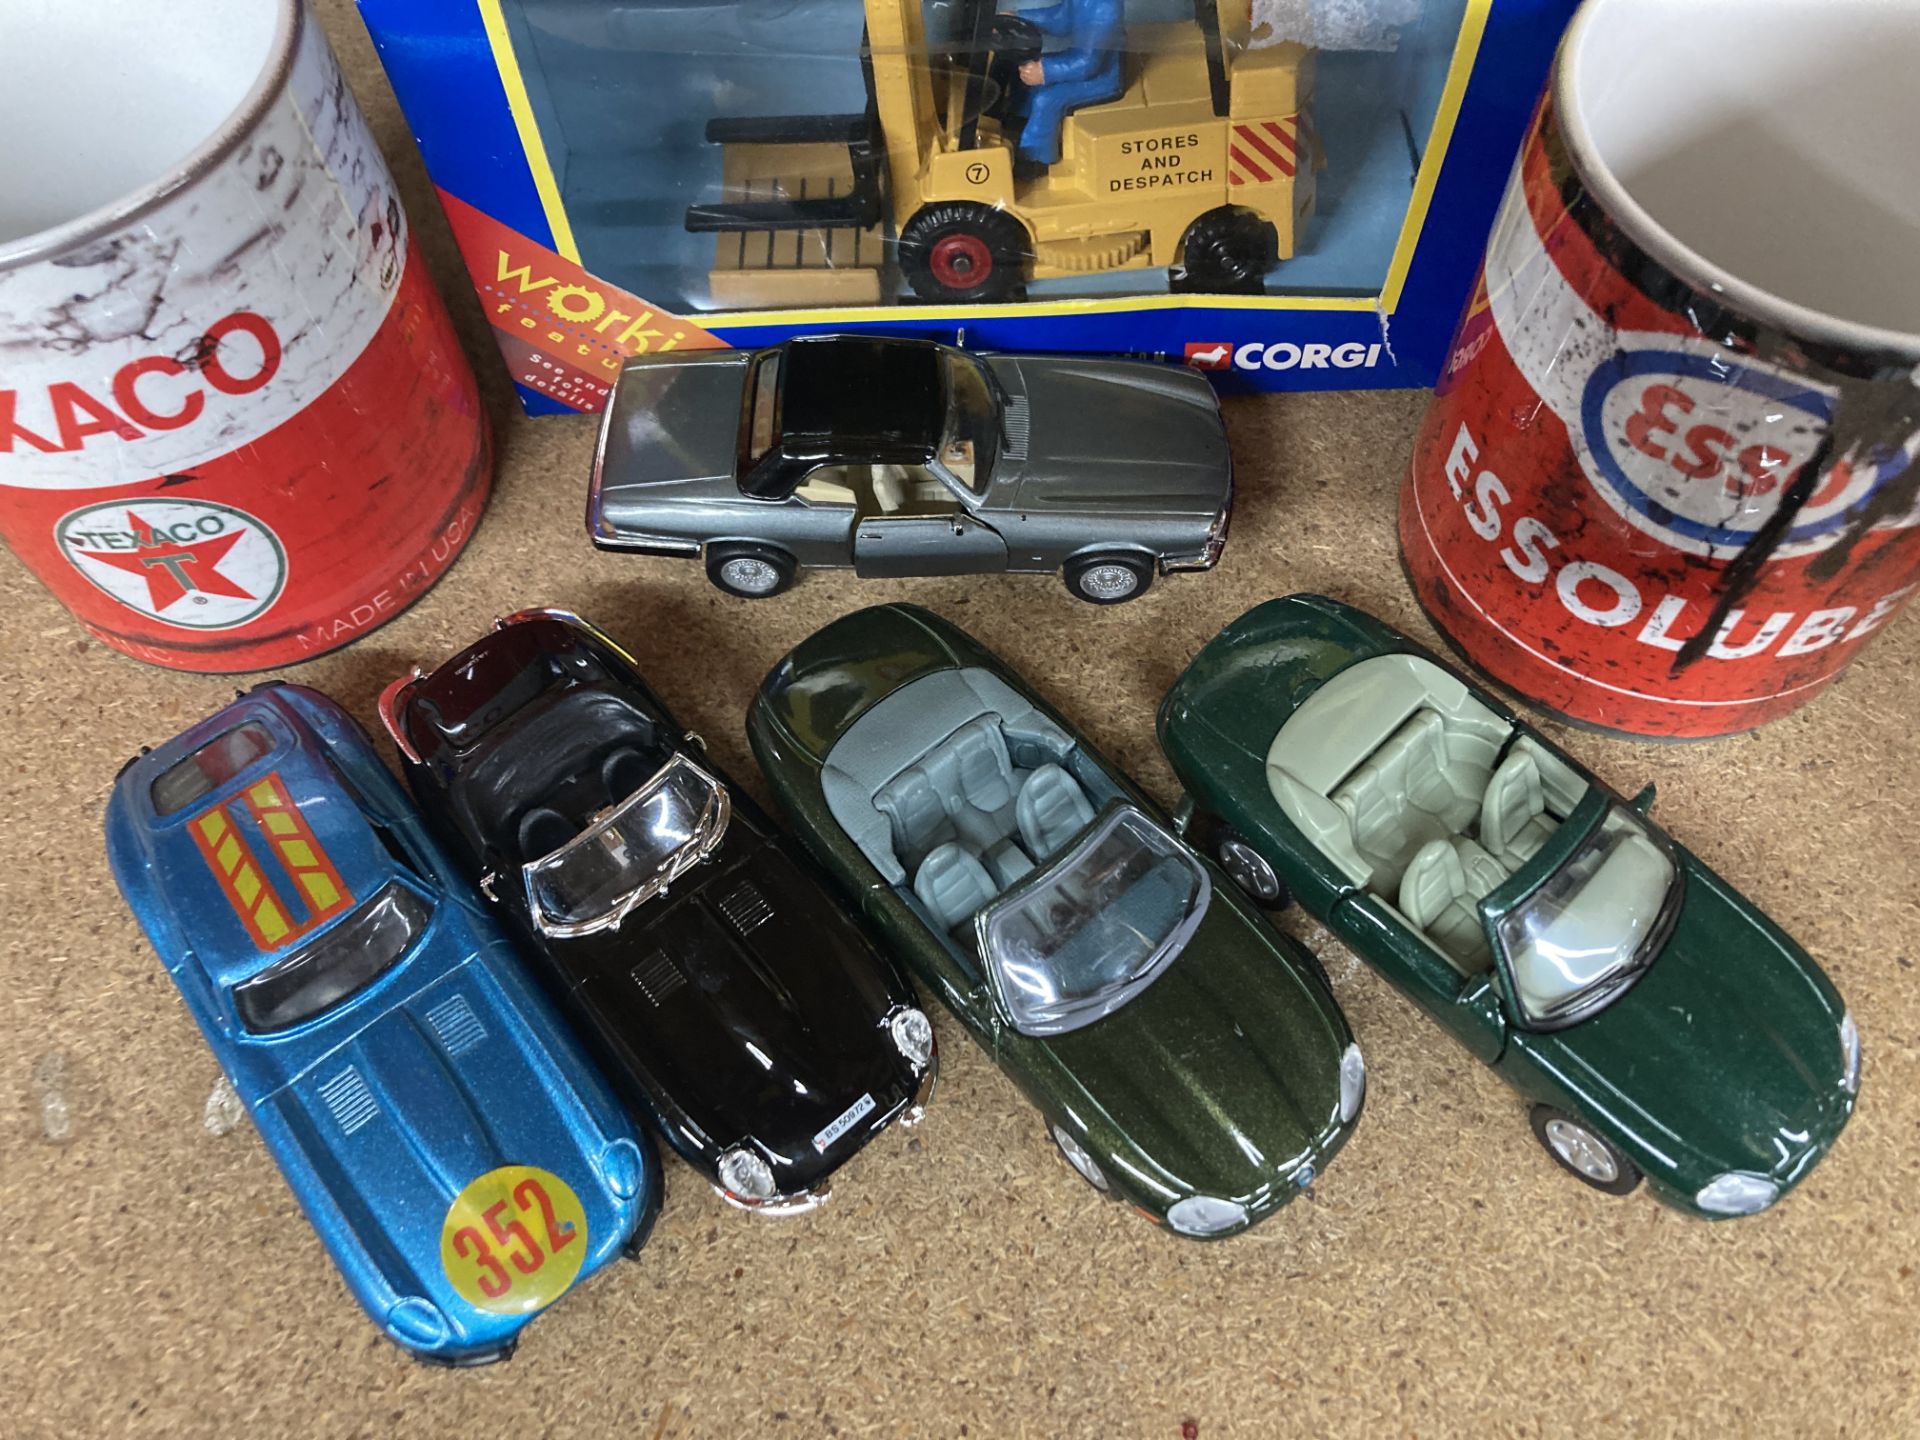 TWO BOXED CORGI MODELS - A FORKLIFT TRUCK AND A BUS, A TEXACO AND ESSO MUG PLUS FIVE DIECAST CARS - Image 10 of 10